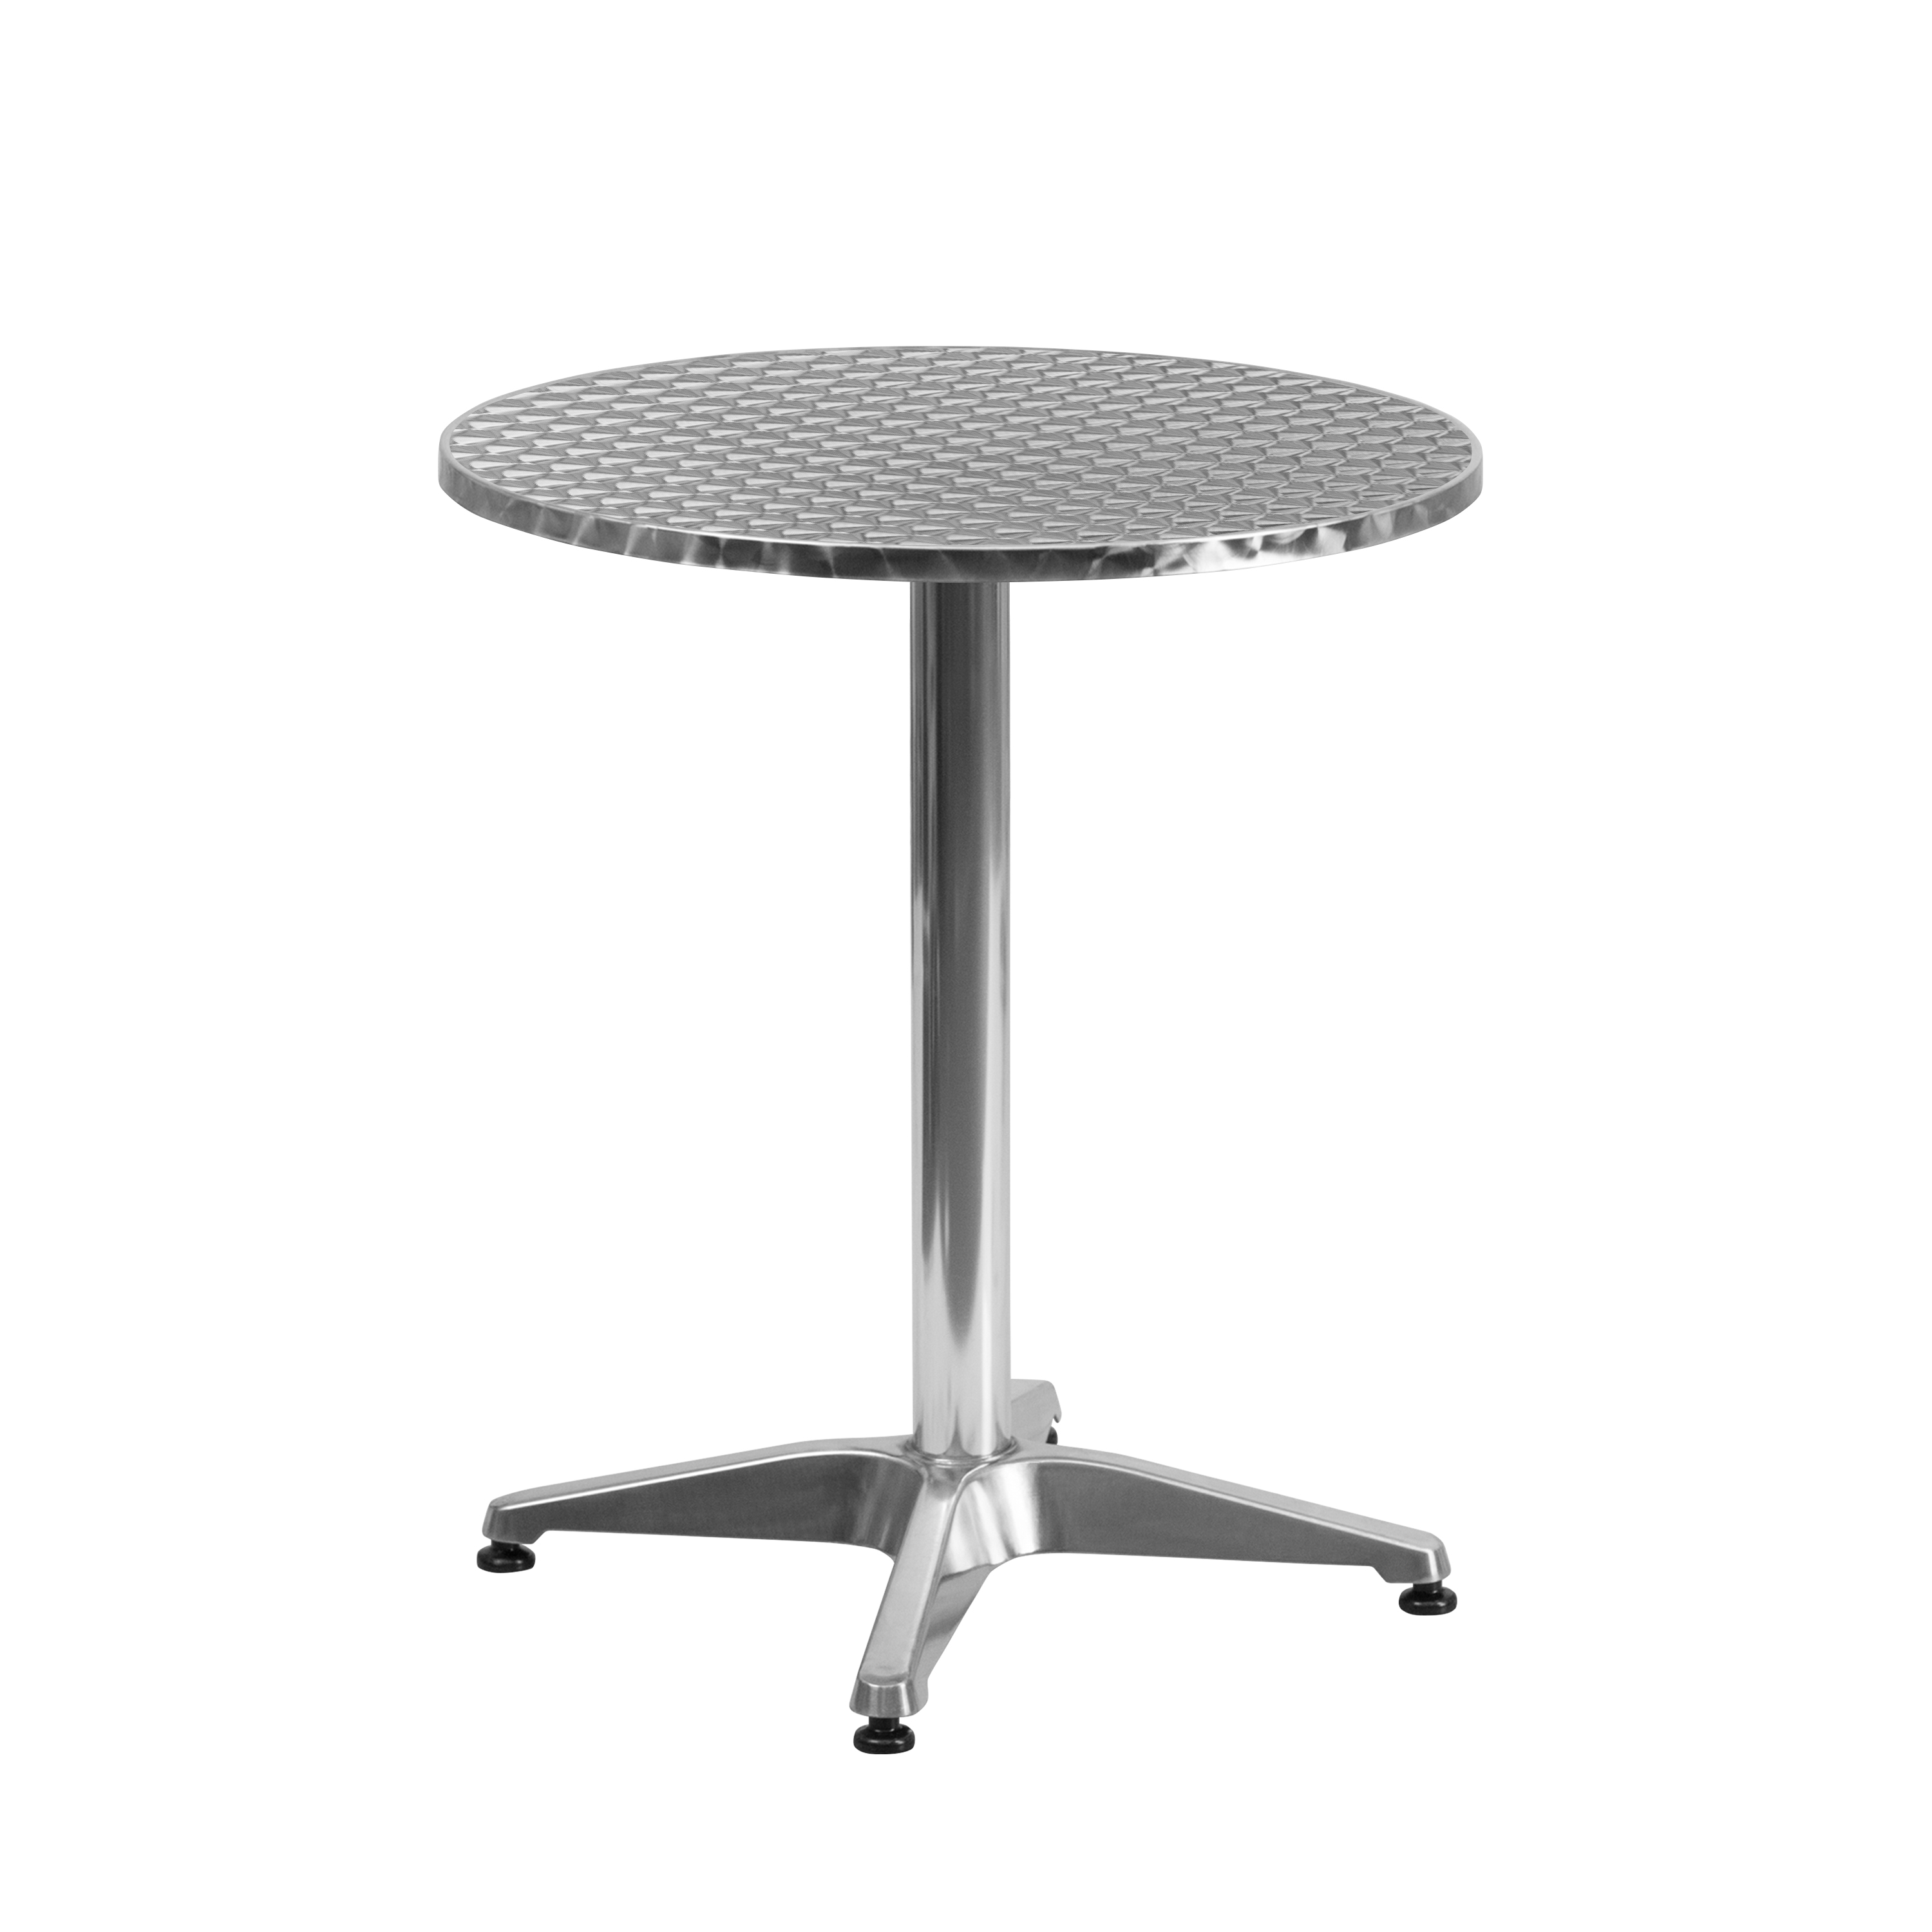 Flash Furniture 23.5'' Round Aluminum Indoor-Outdoor Table Set with 4 Slat Back Chairs - image 4 of 5